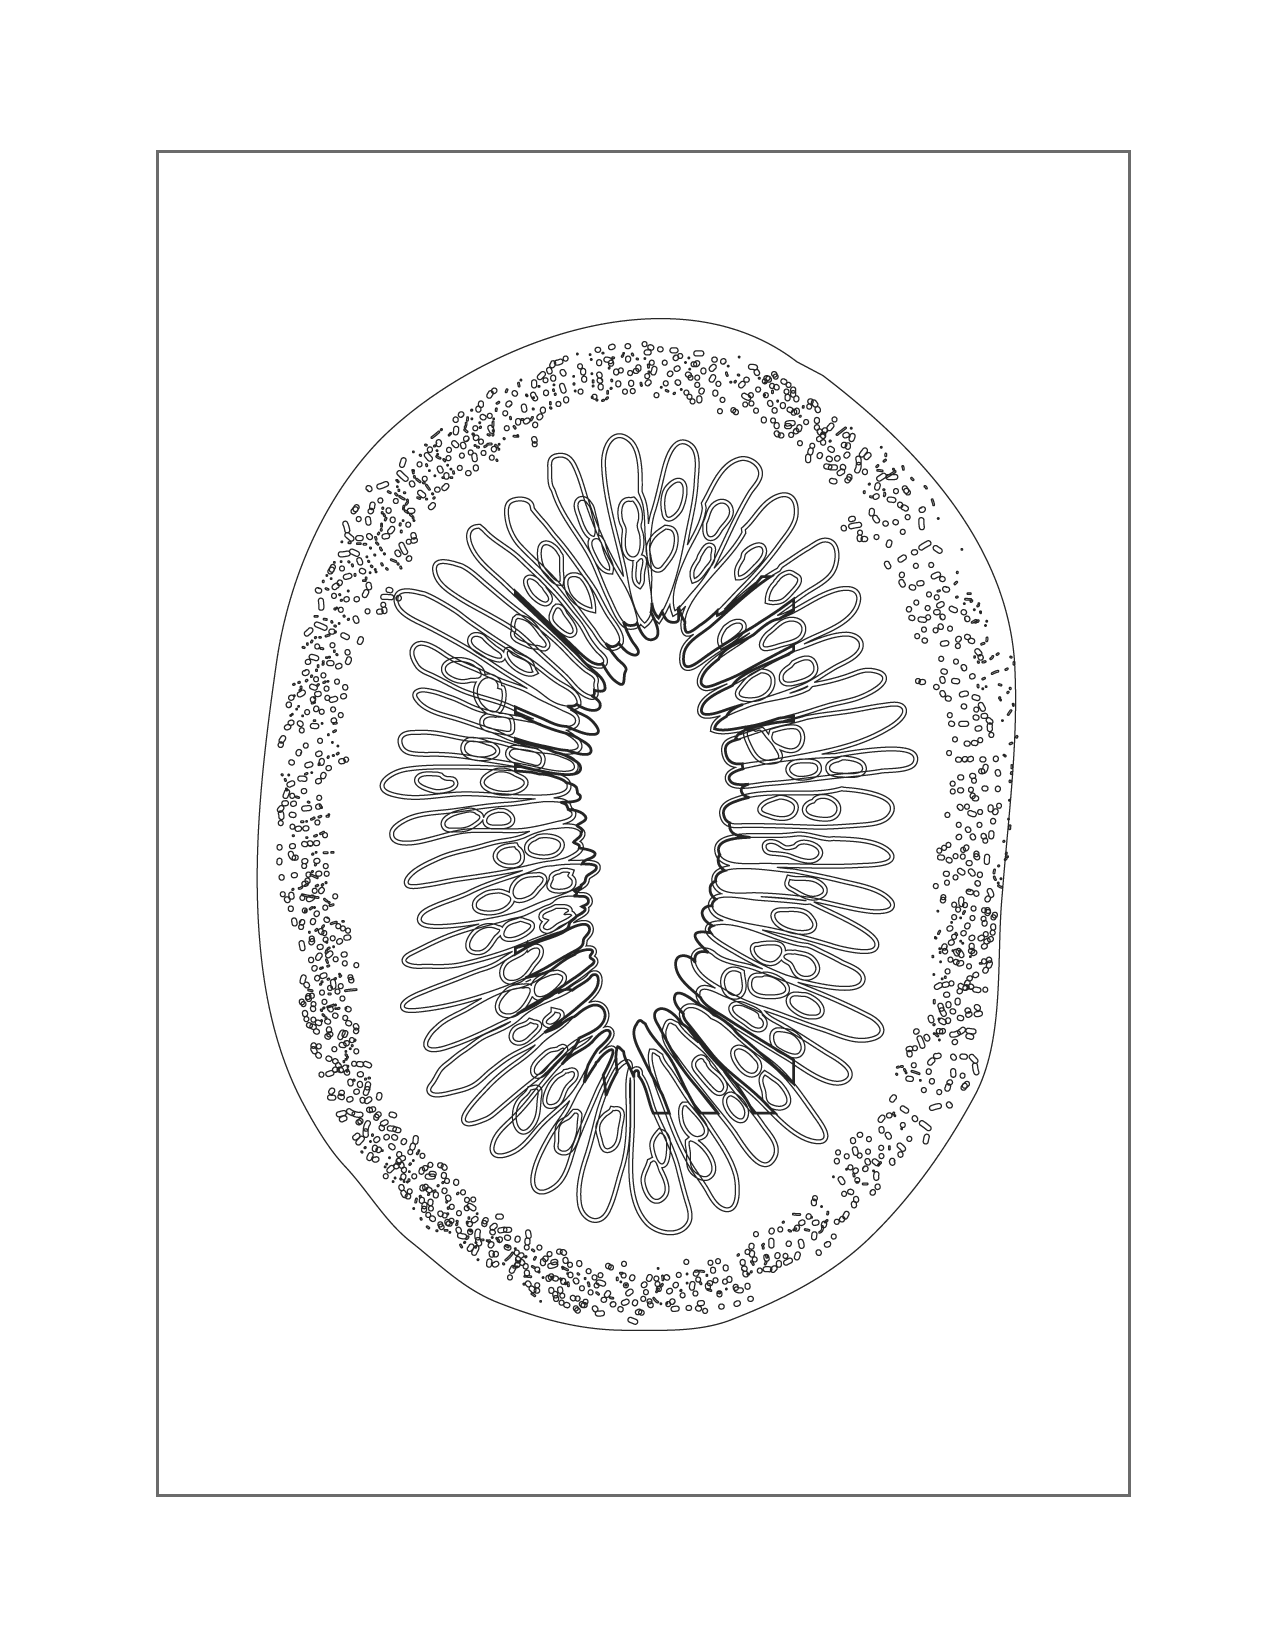 Kiwi Coloring Pages